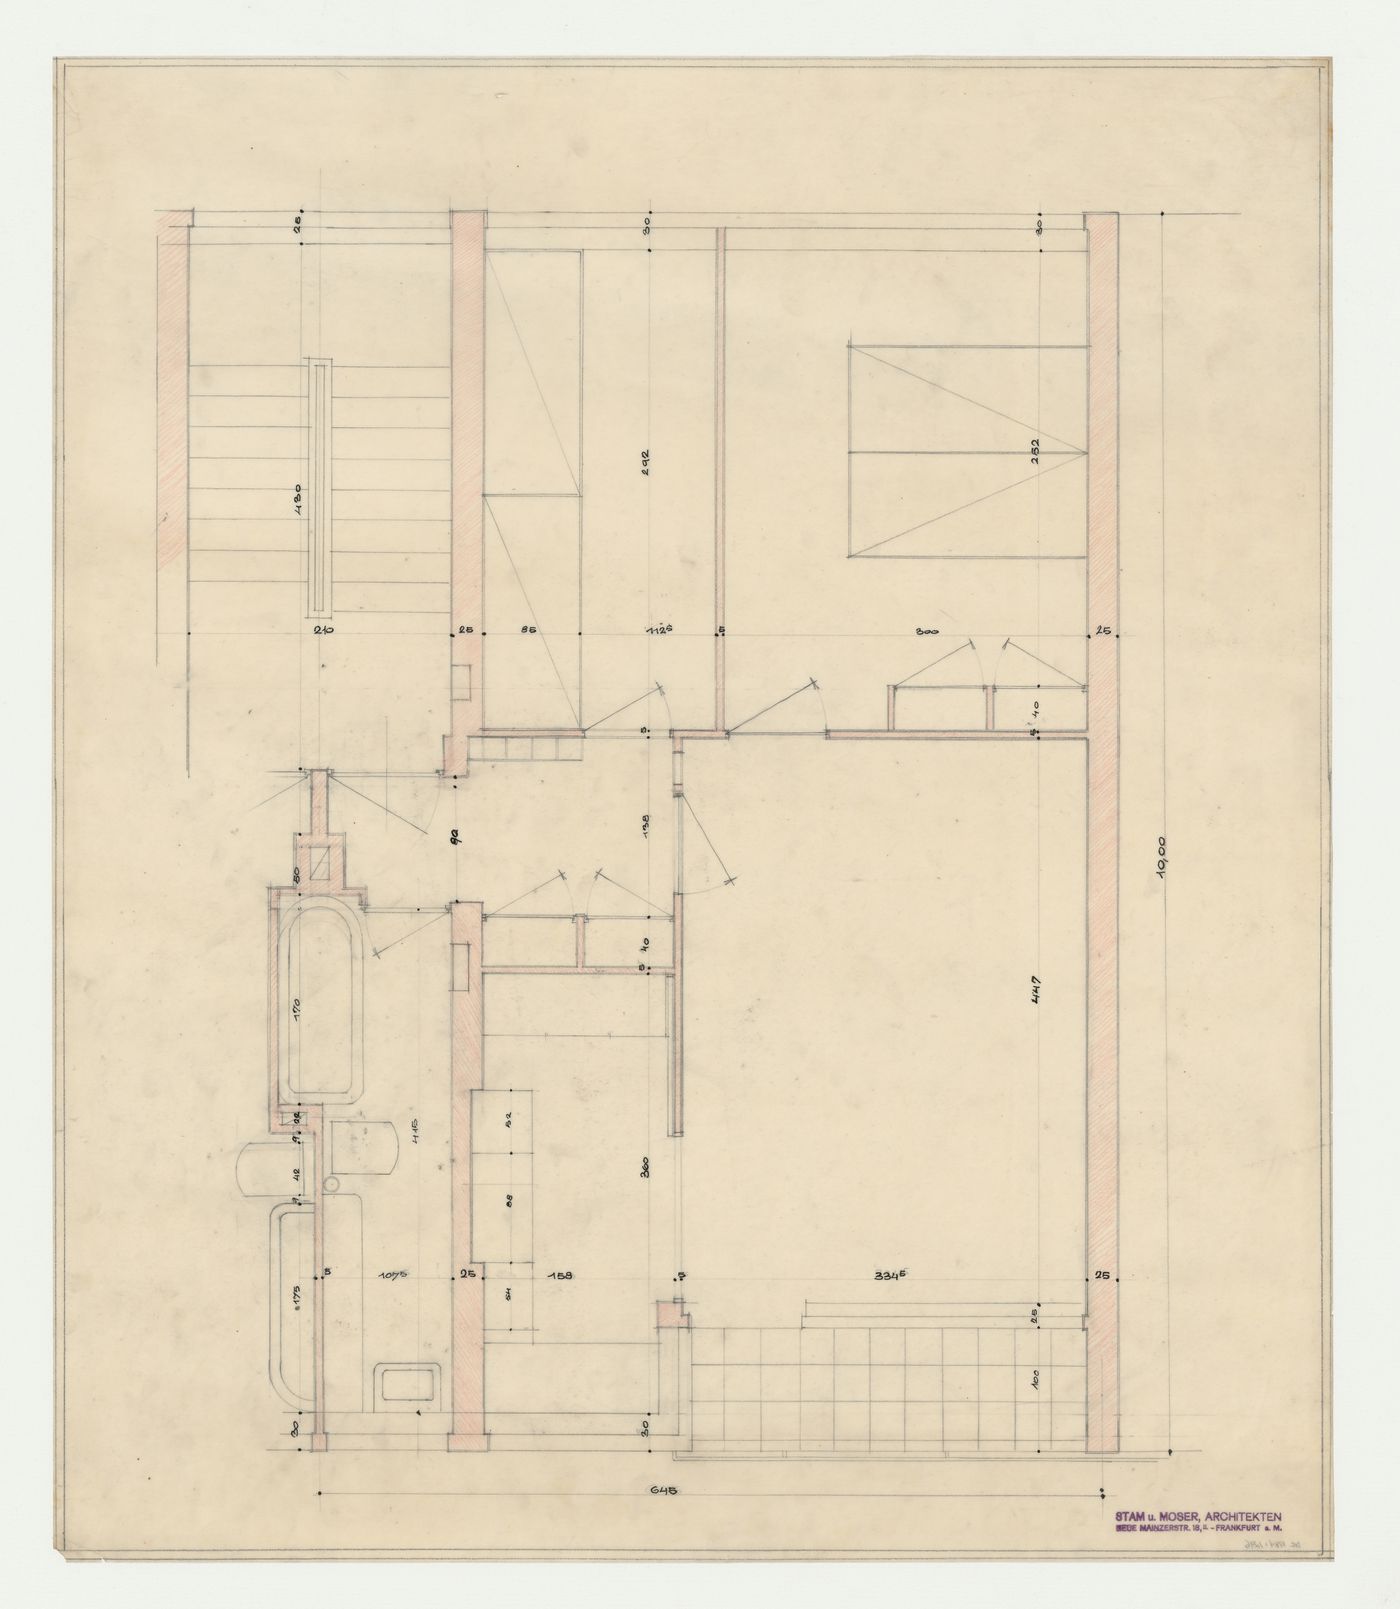 Plan for a housing unit, probably for Hellerhof Housing Estate, Frankfurt am Main, Germany